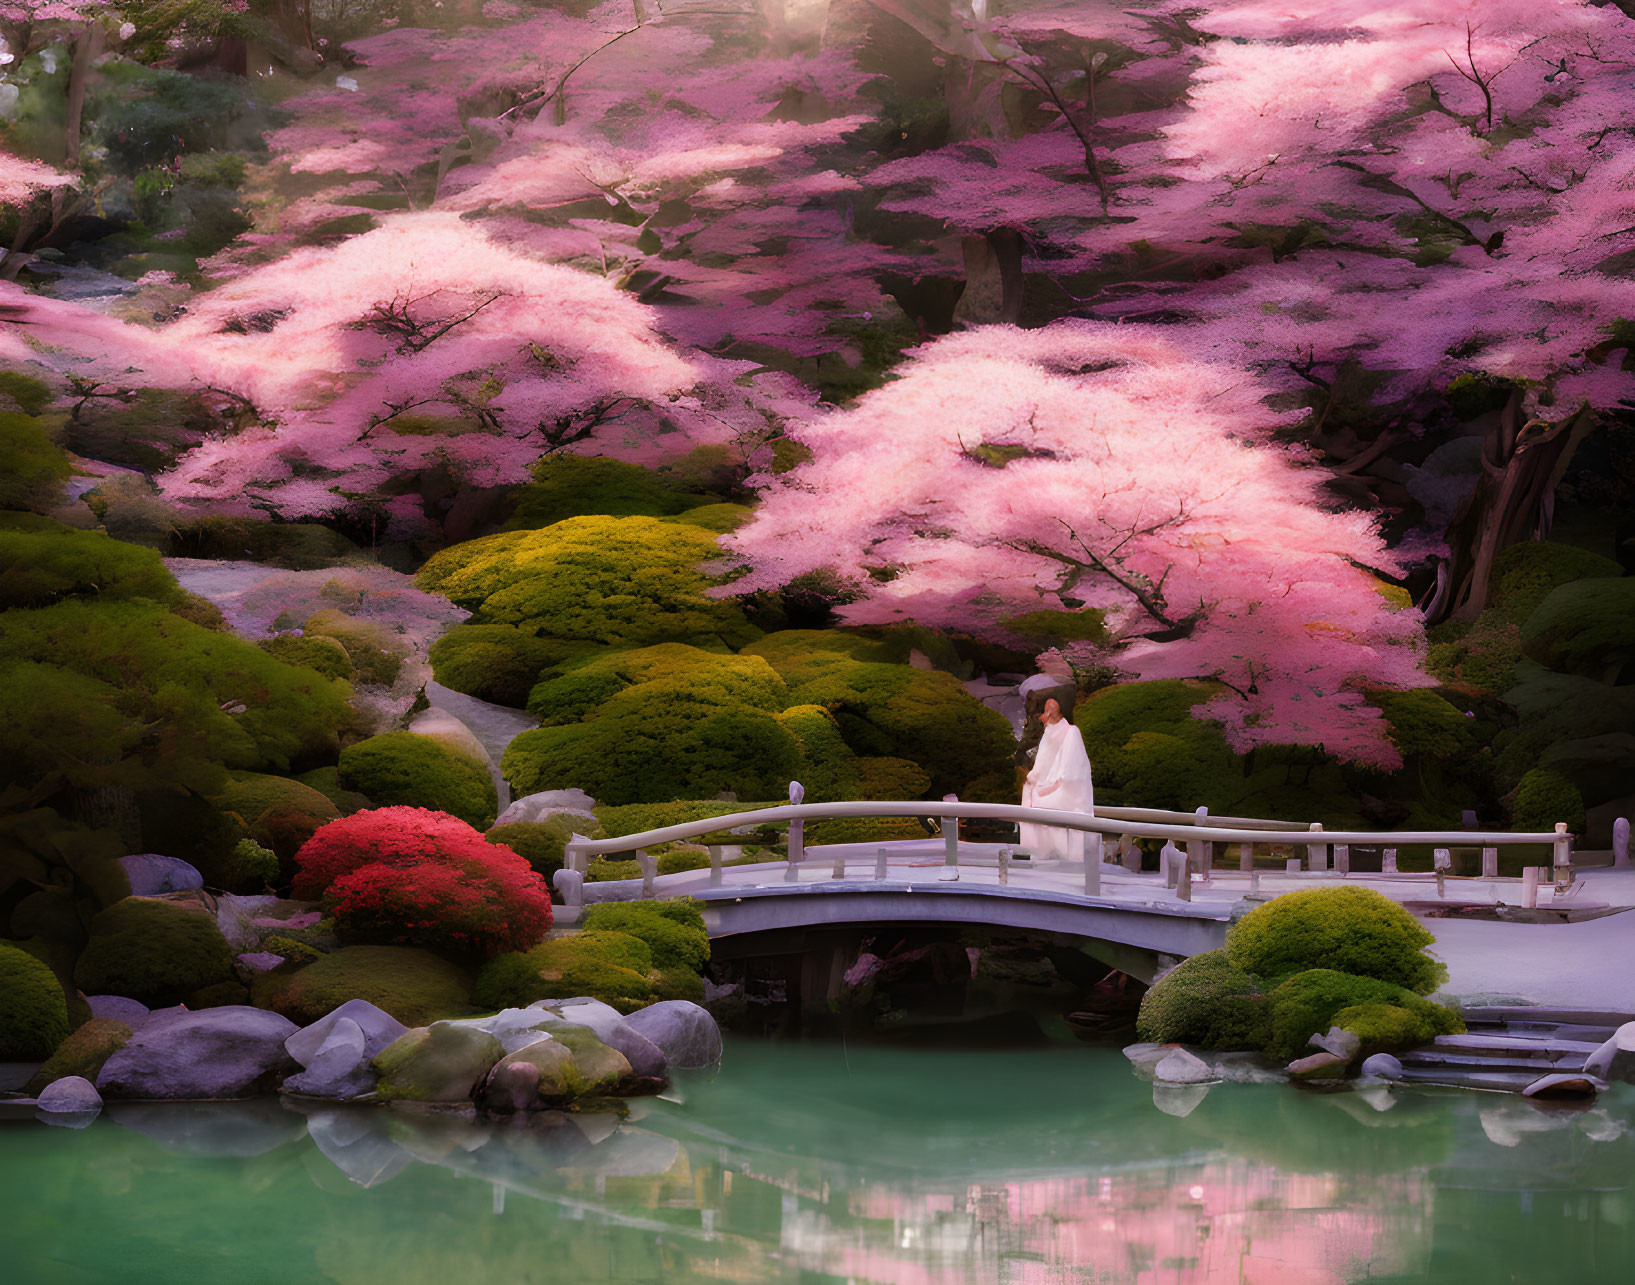 Tranquil garden with pink cherry blossoms, lush greenery, serene pond, and person on